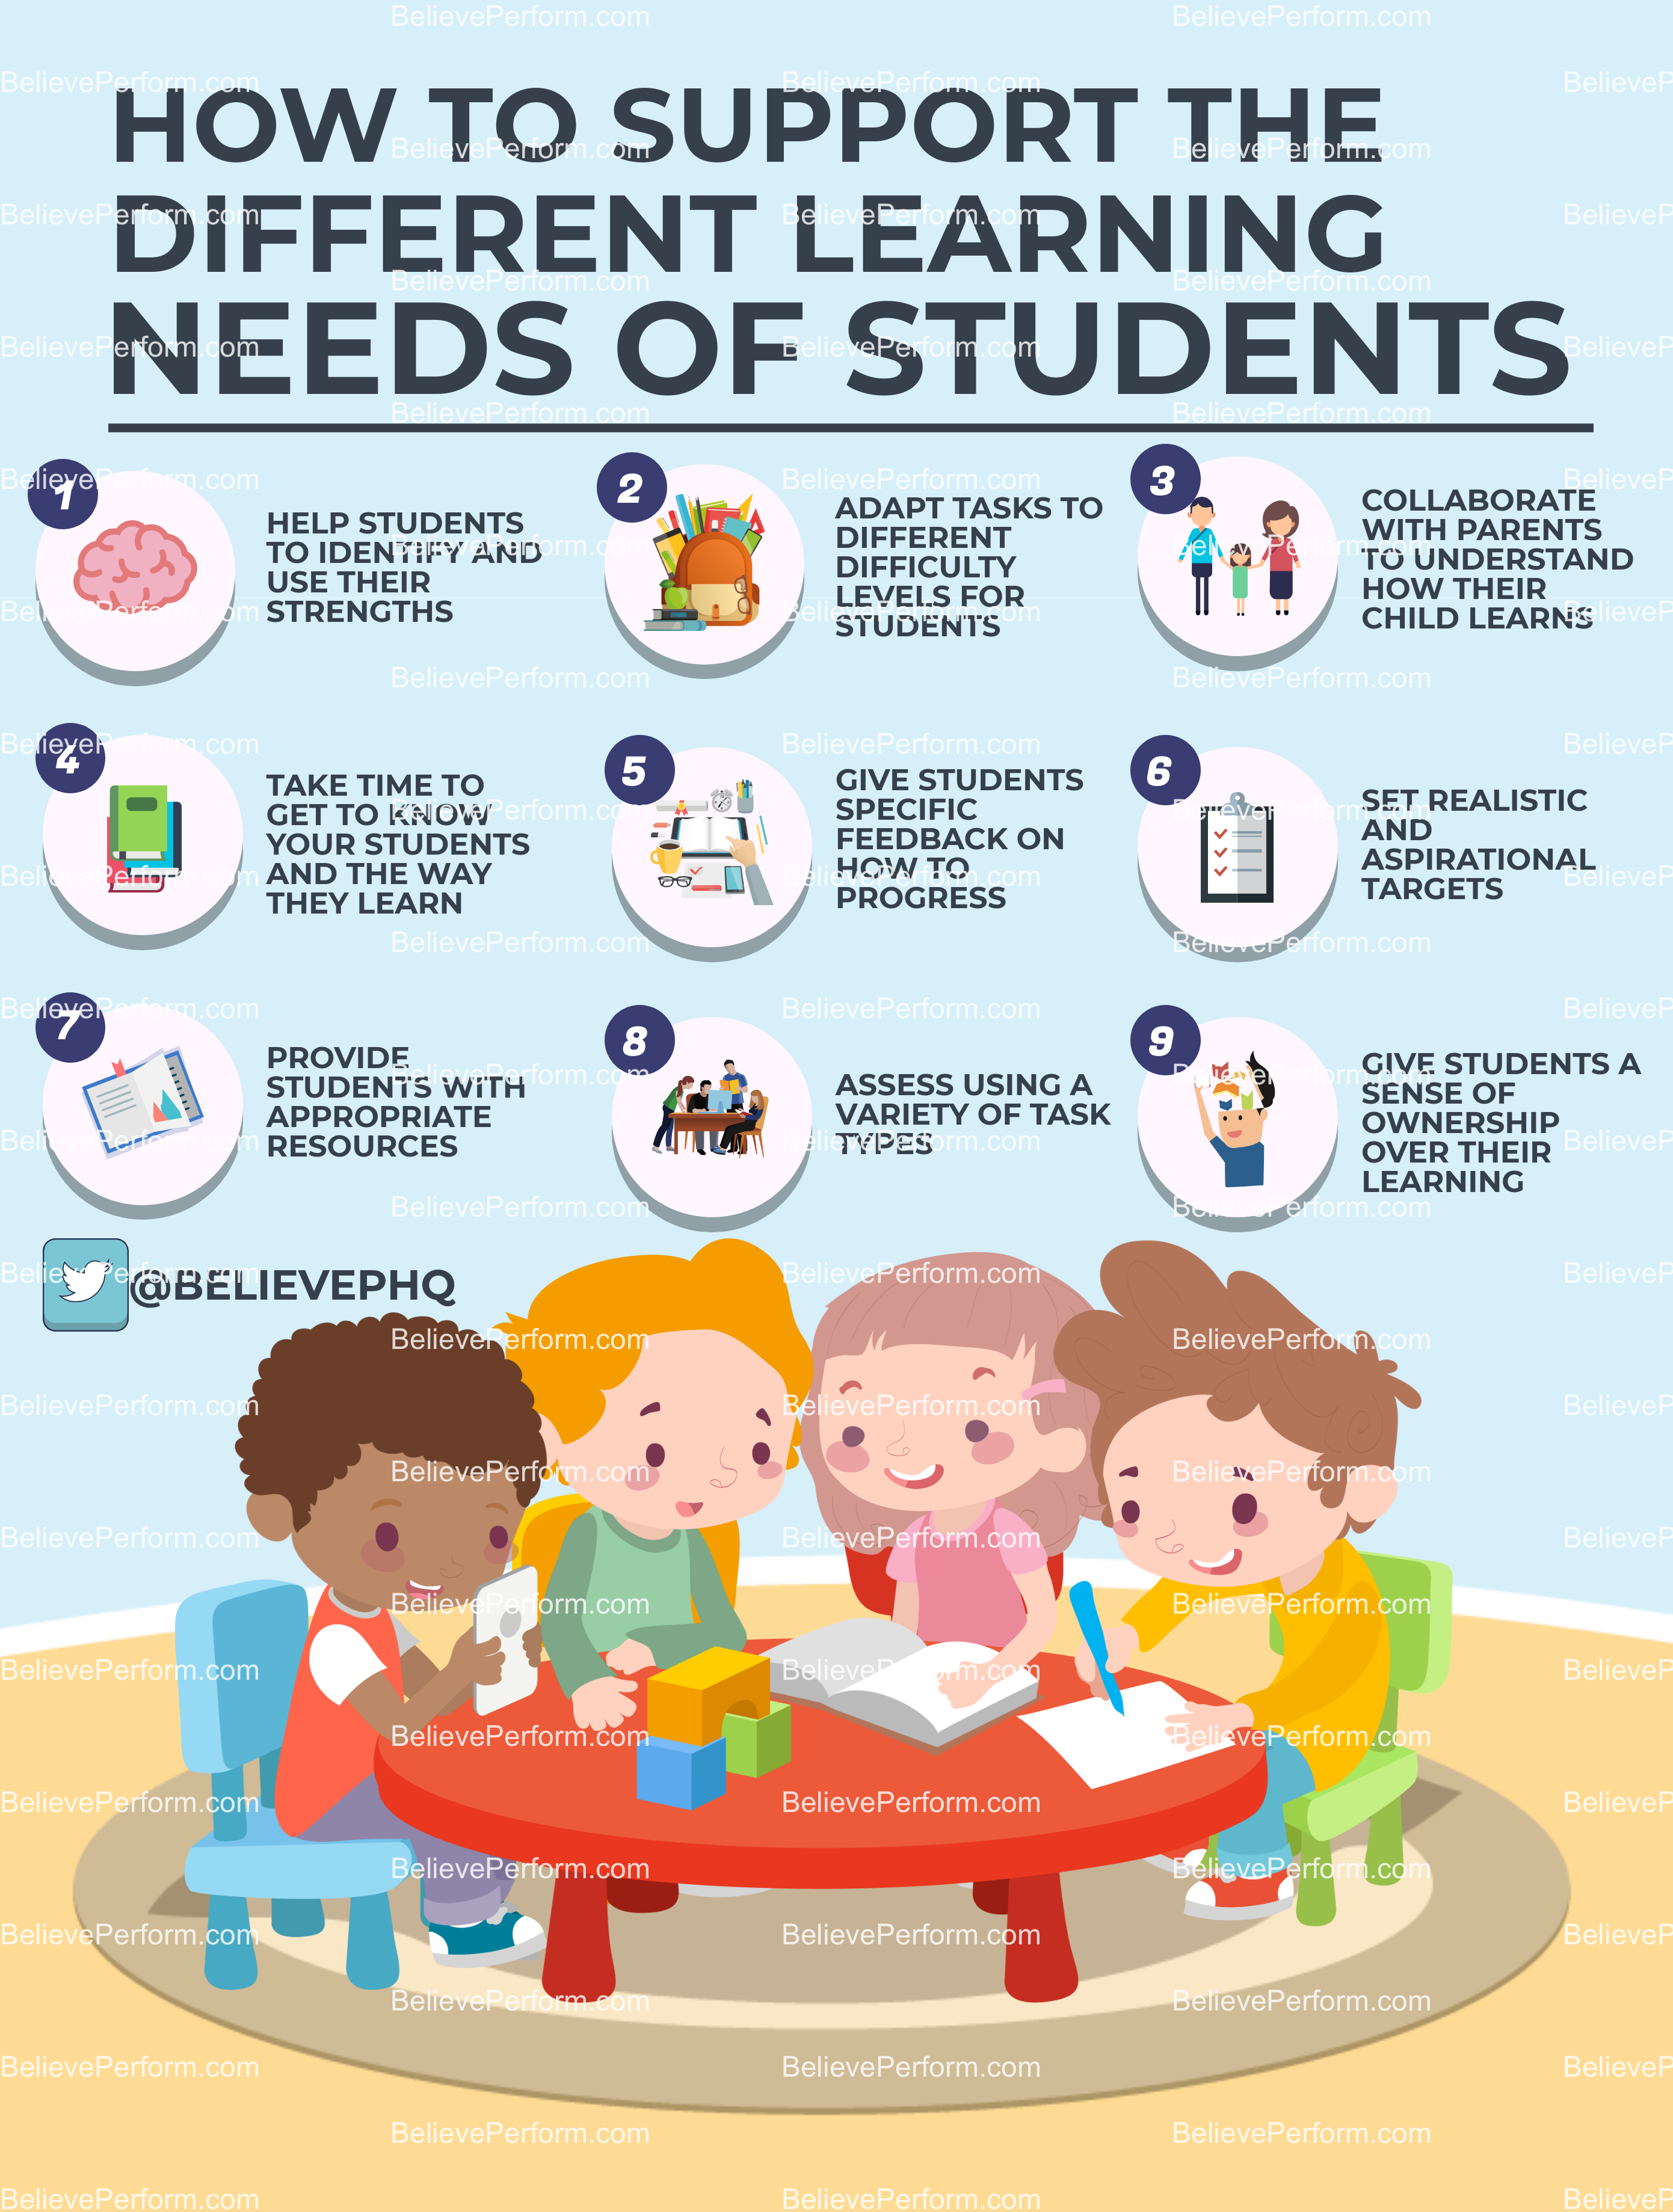 How to support the different learning needs of students